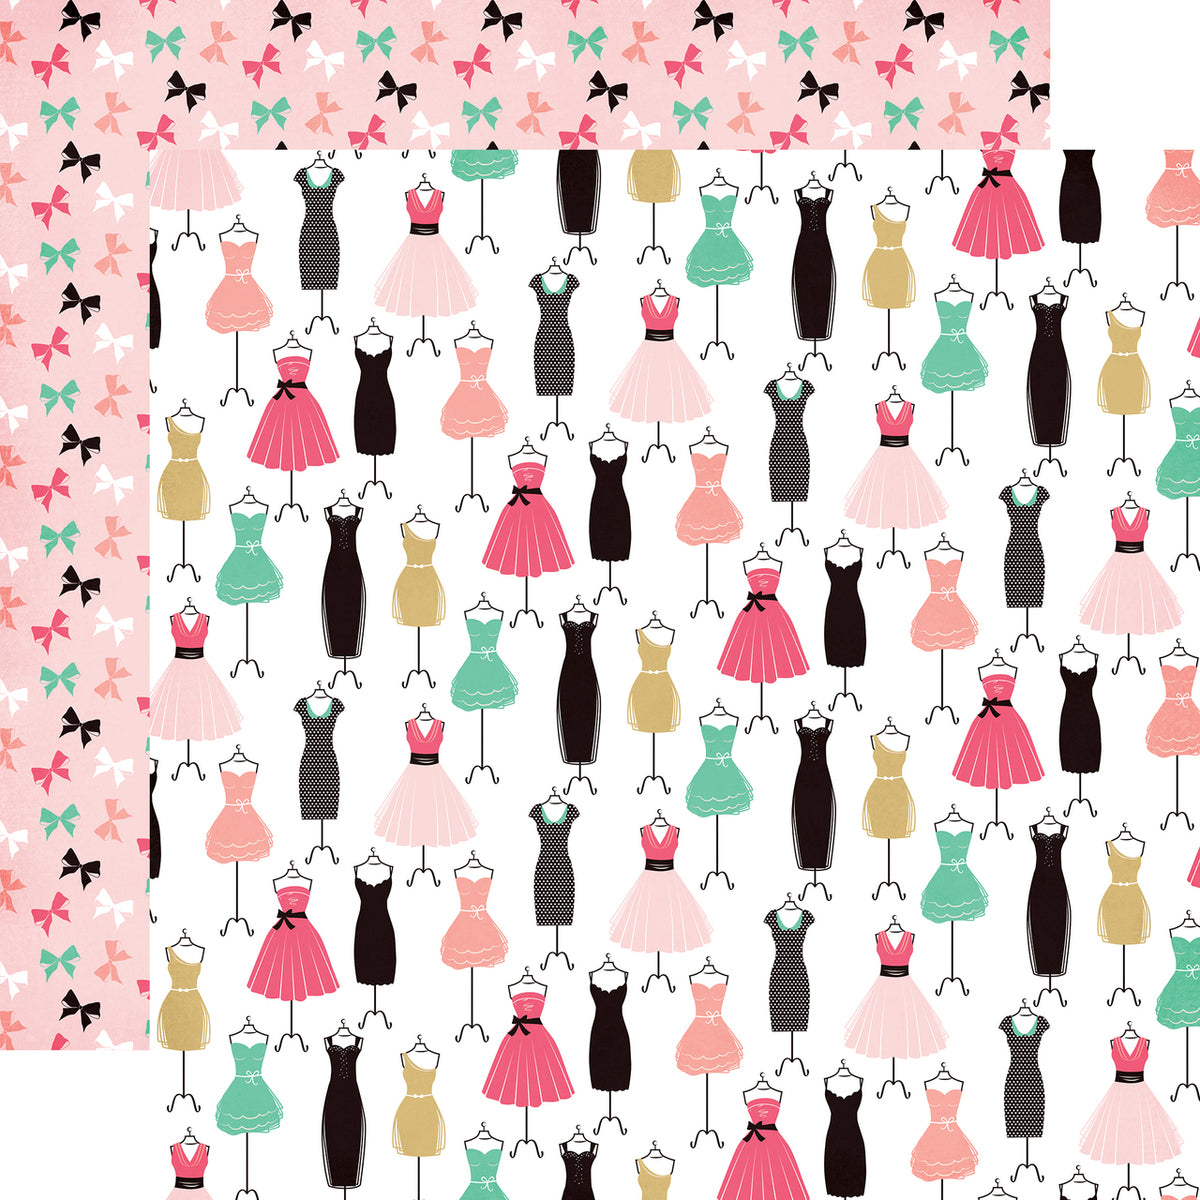 Dress For Success - 12x12 double-sided patterned paper focused on fashion from Echo Park Paper